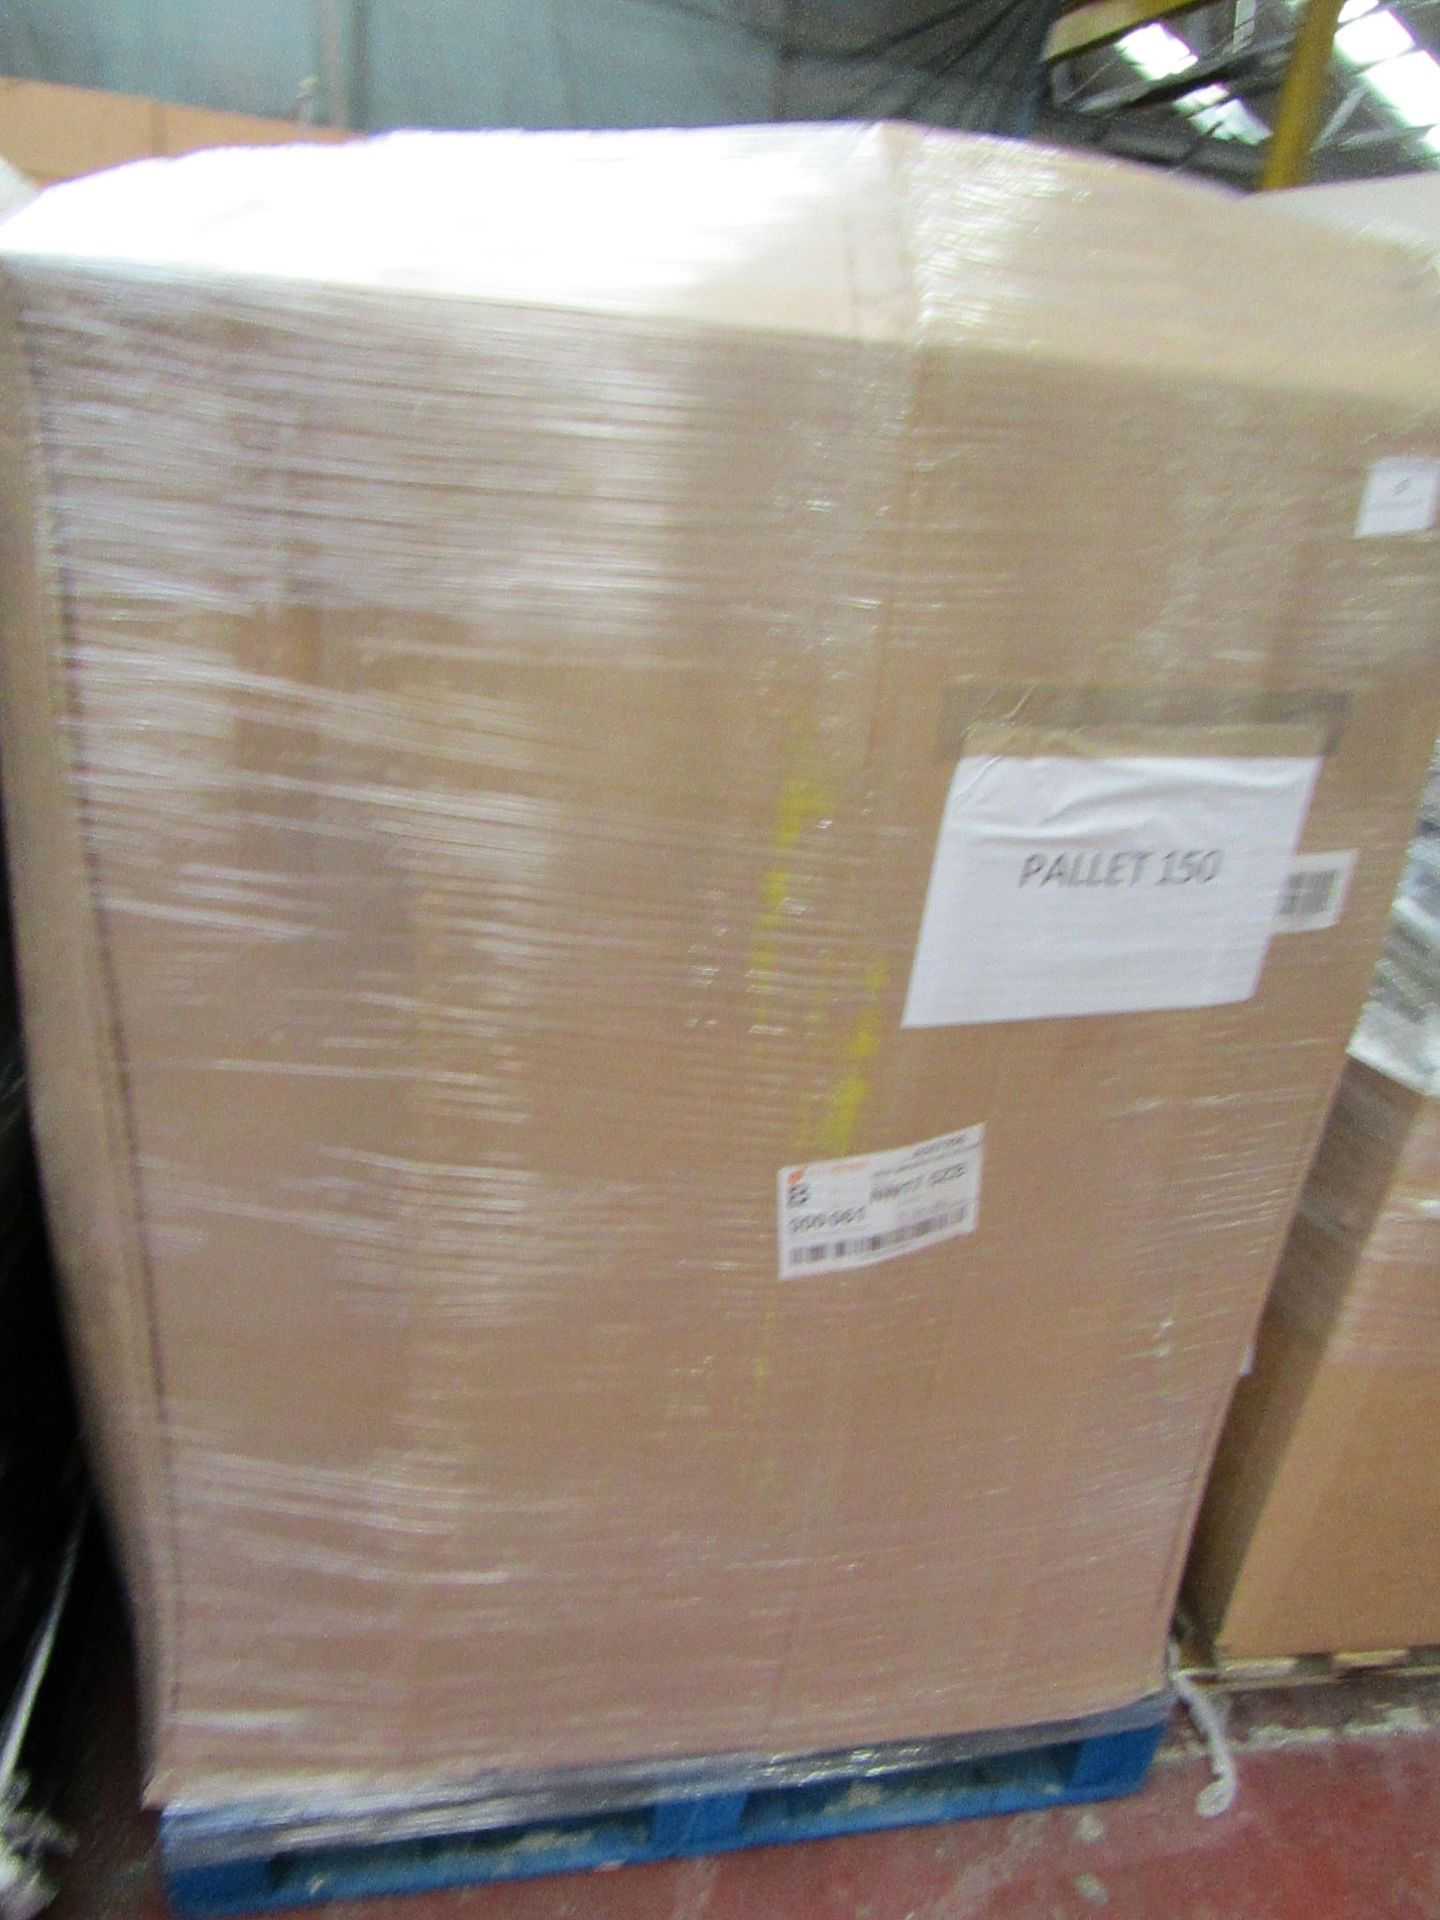 | APPROX 86X | THE PALLET CONTAINS NUTRI BULLETS, NUBREEZE, MAXI GLIDERS, RED COPPER CHEFS, XHOSES